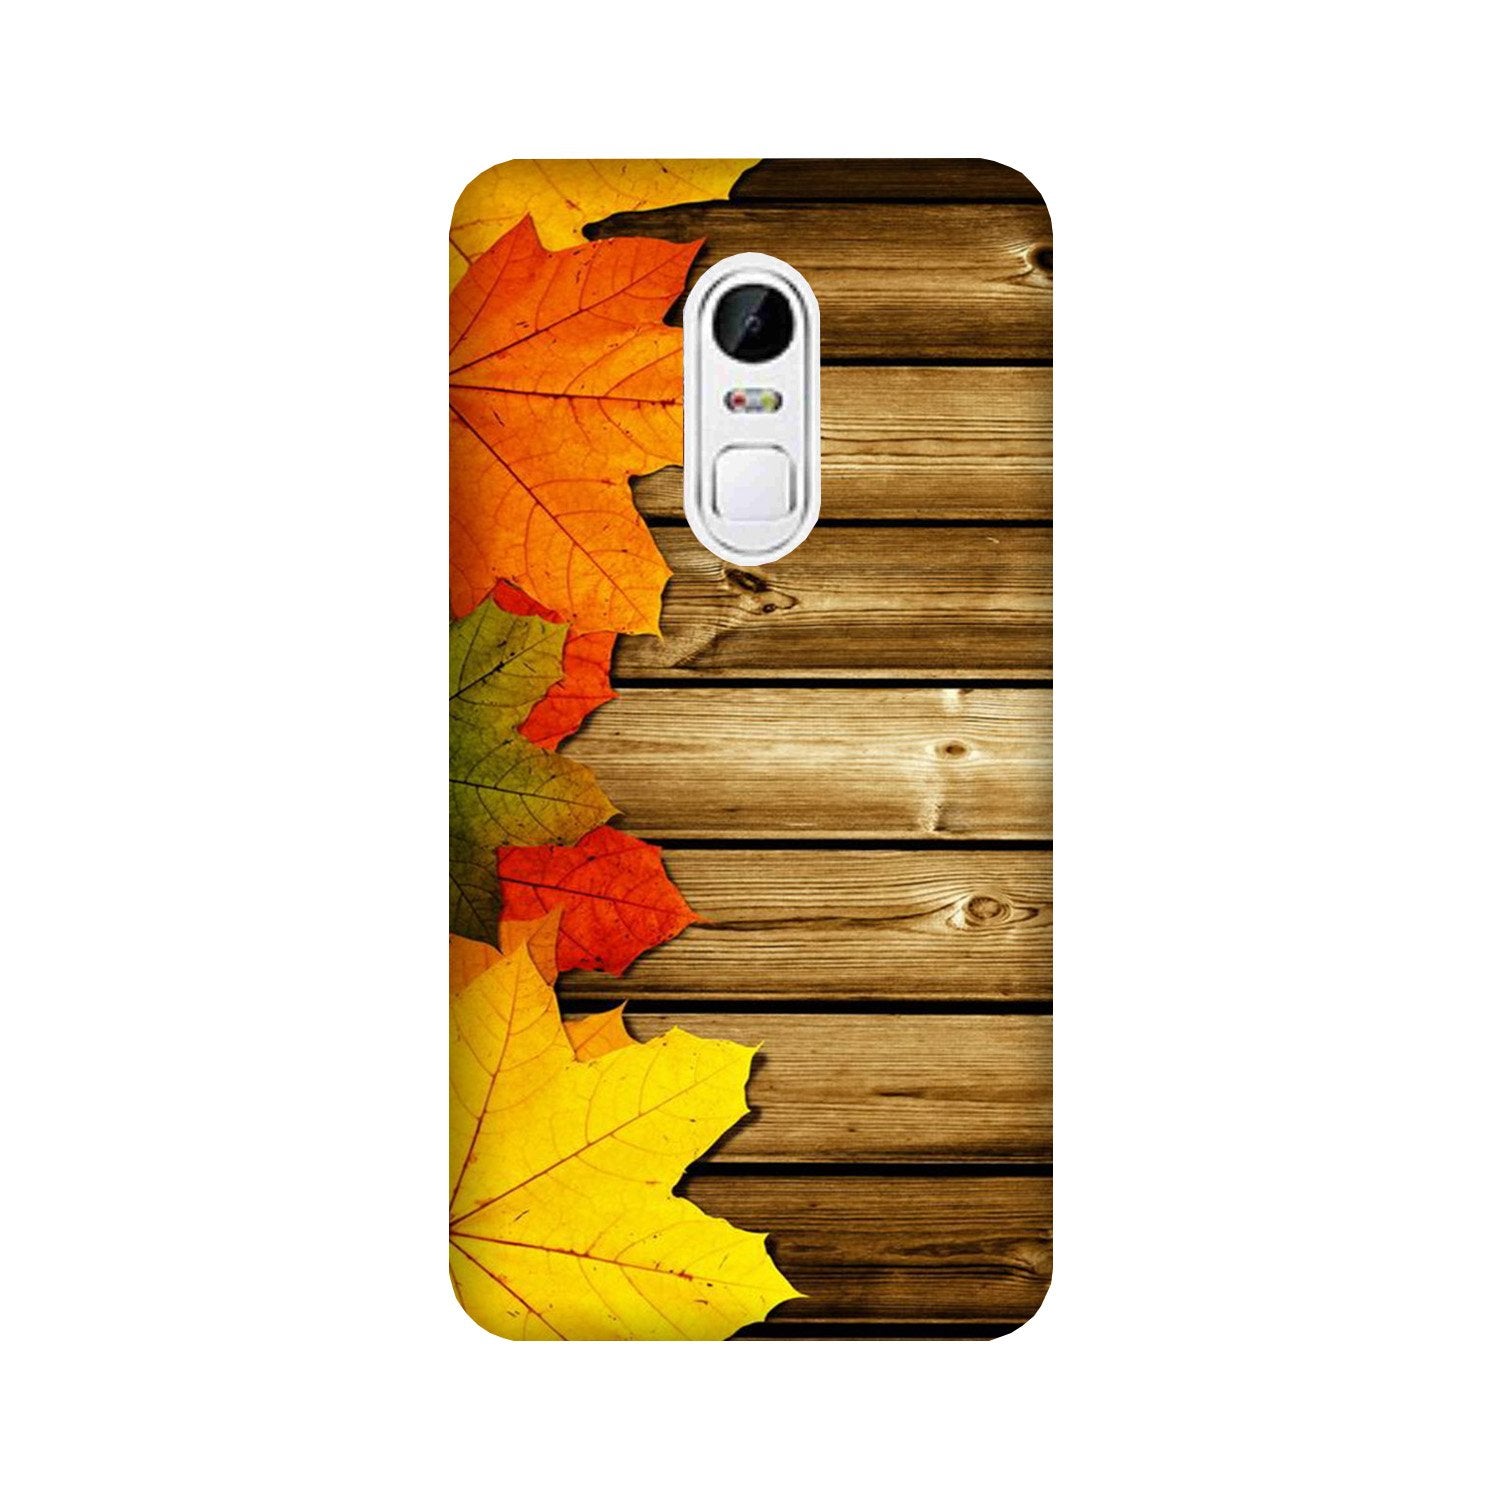 Wooden look3 Case for Lenovo Vibe X3